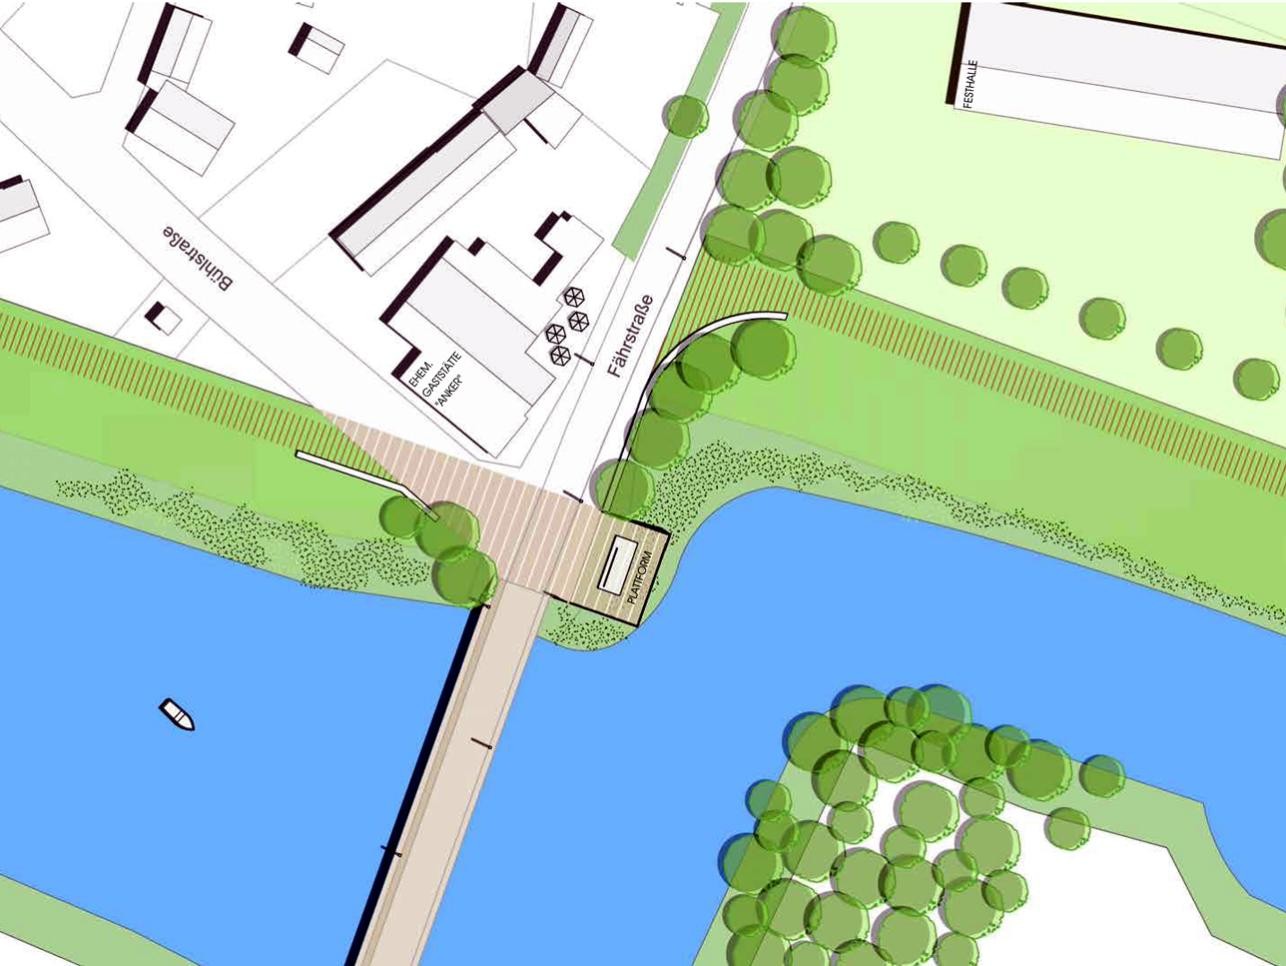 Graphic of Plittersdorf anchor bridge and ferry road with Old Rhine, houses and trees